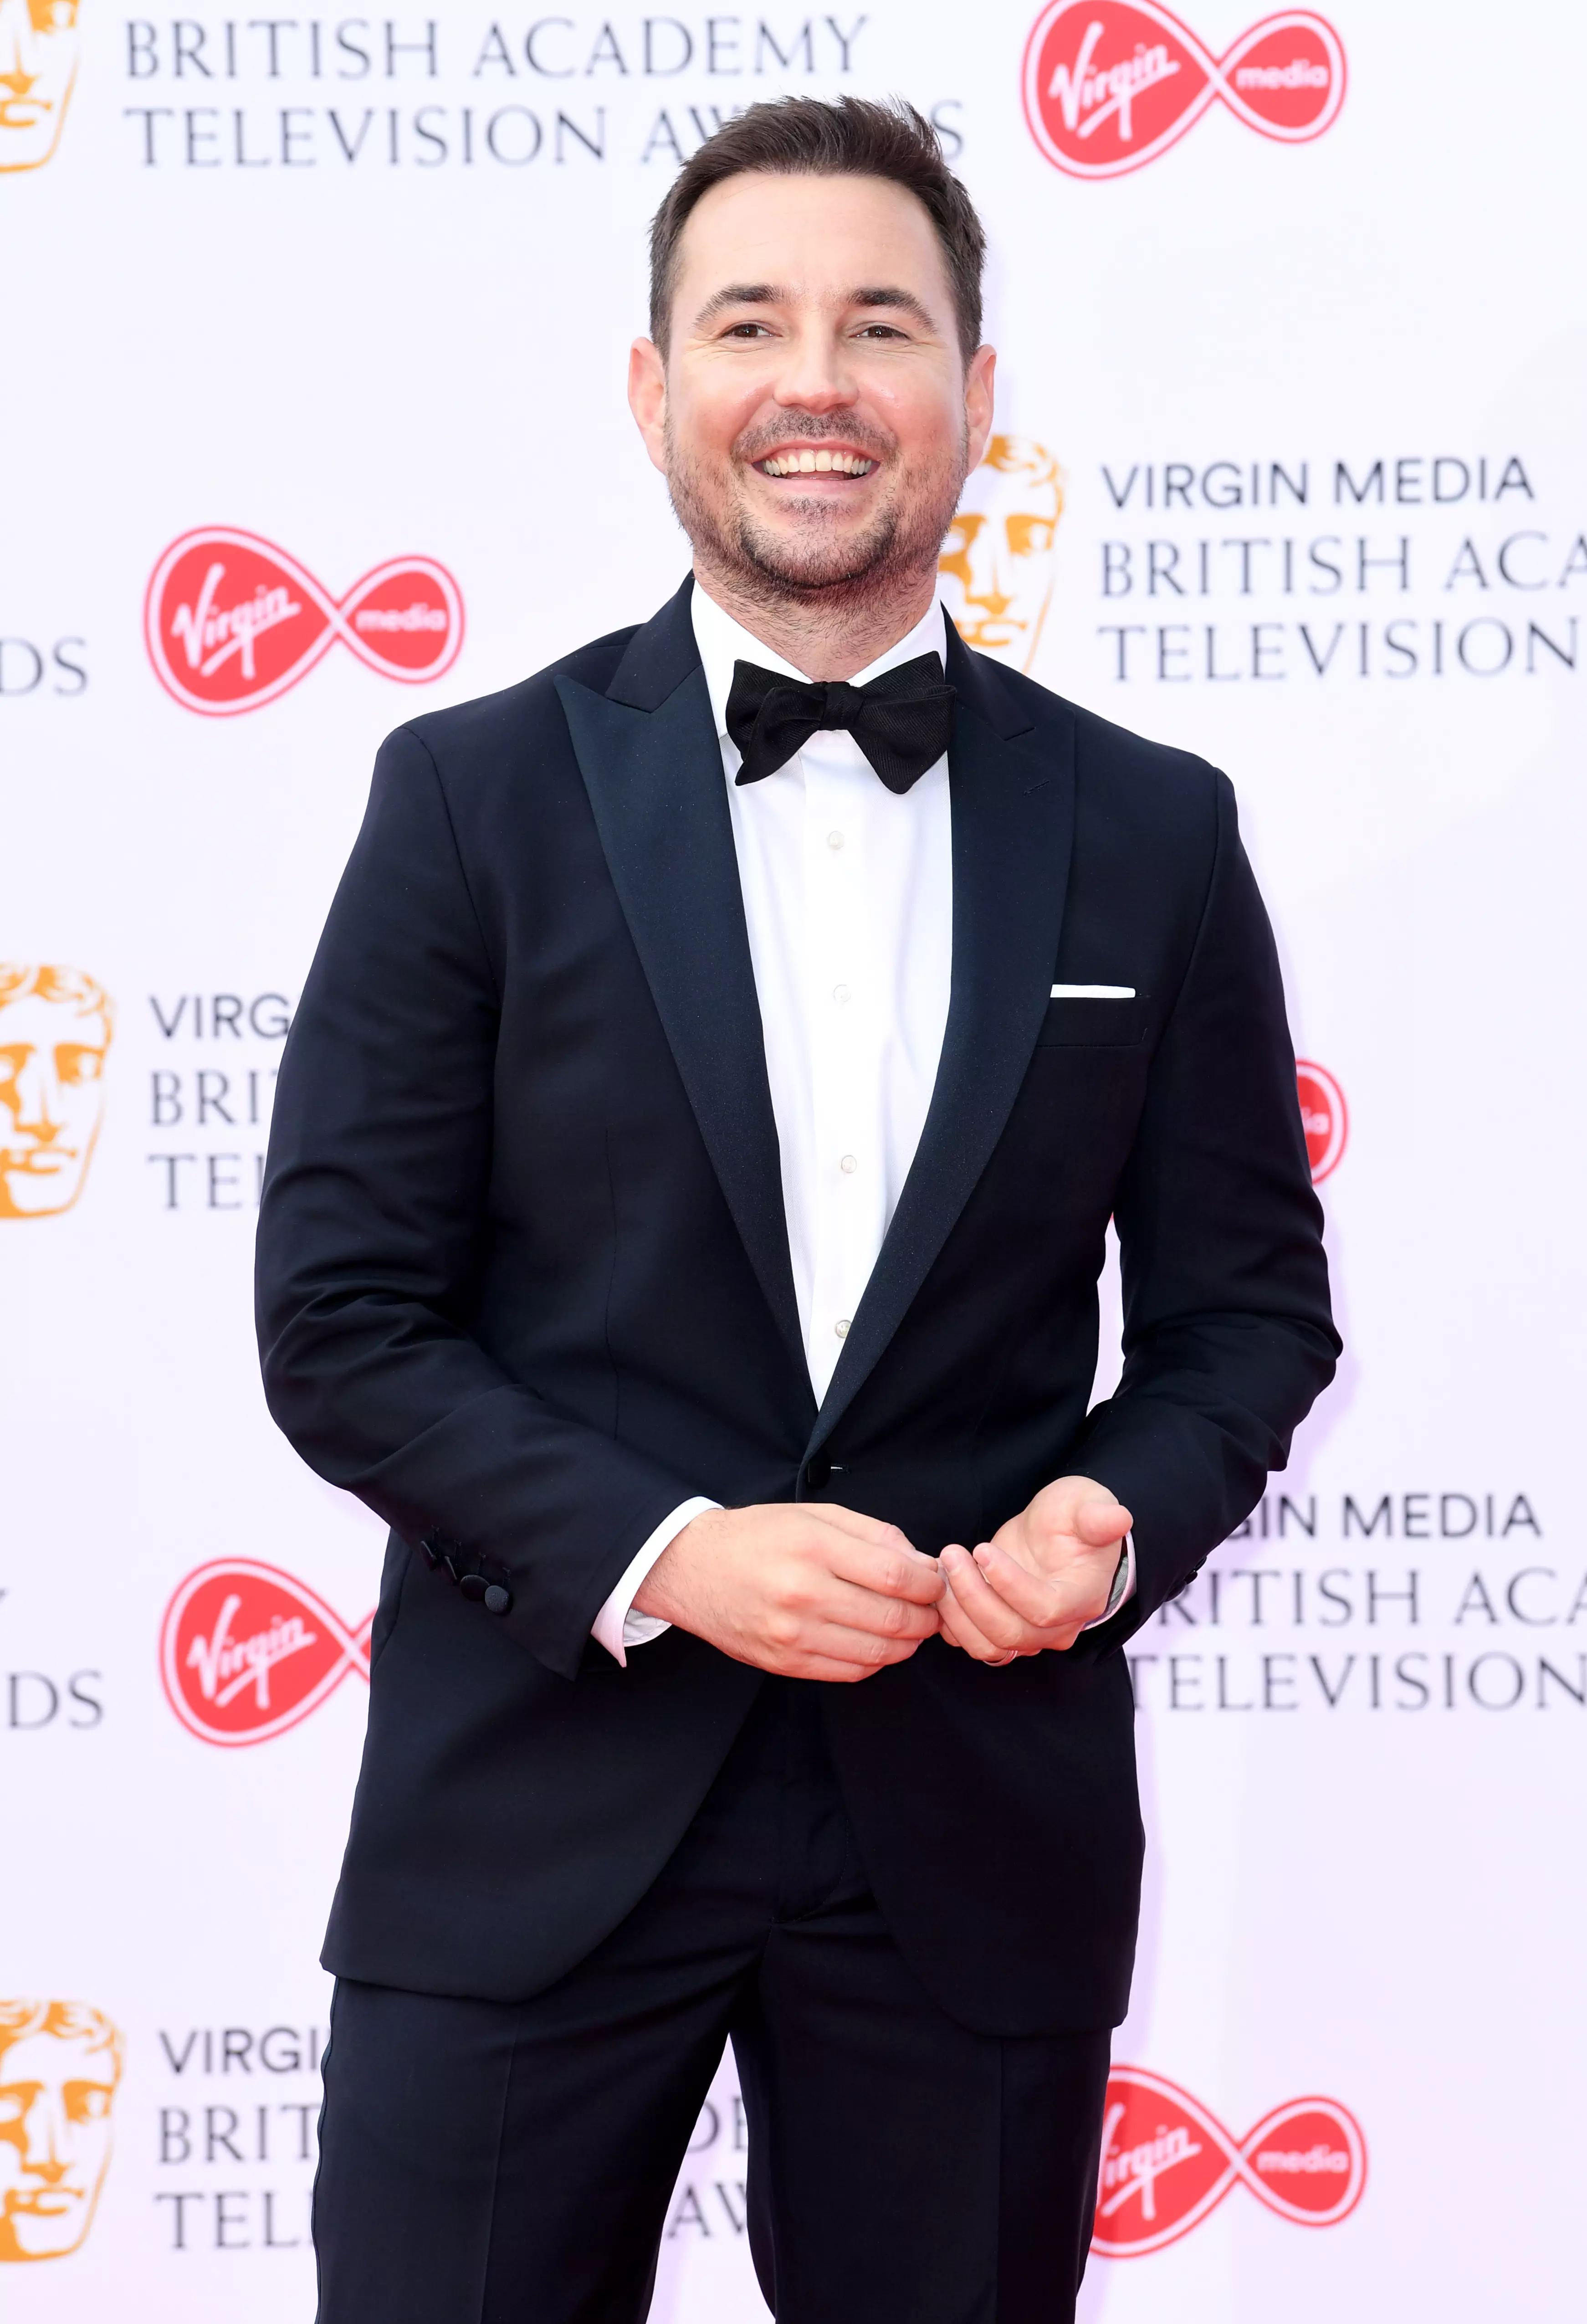 Fans are surprised that Martin Compston is Scottish.